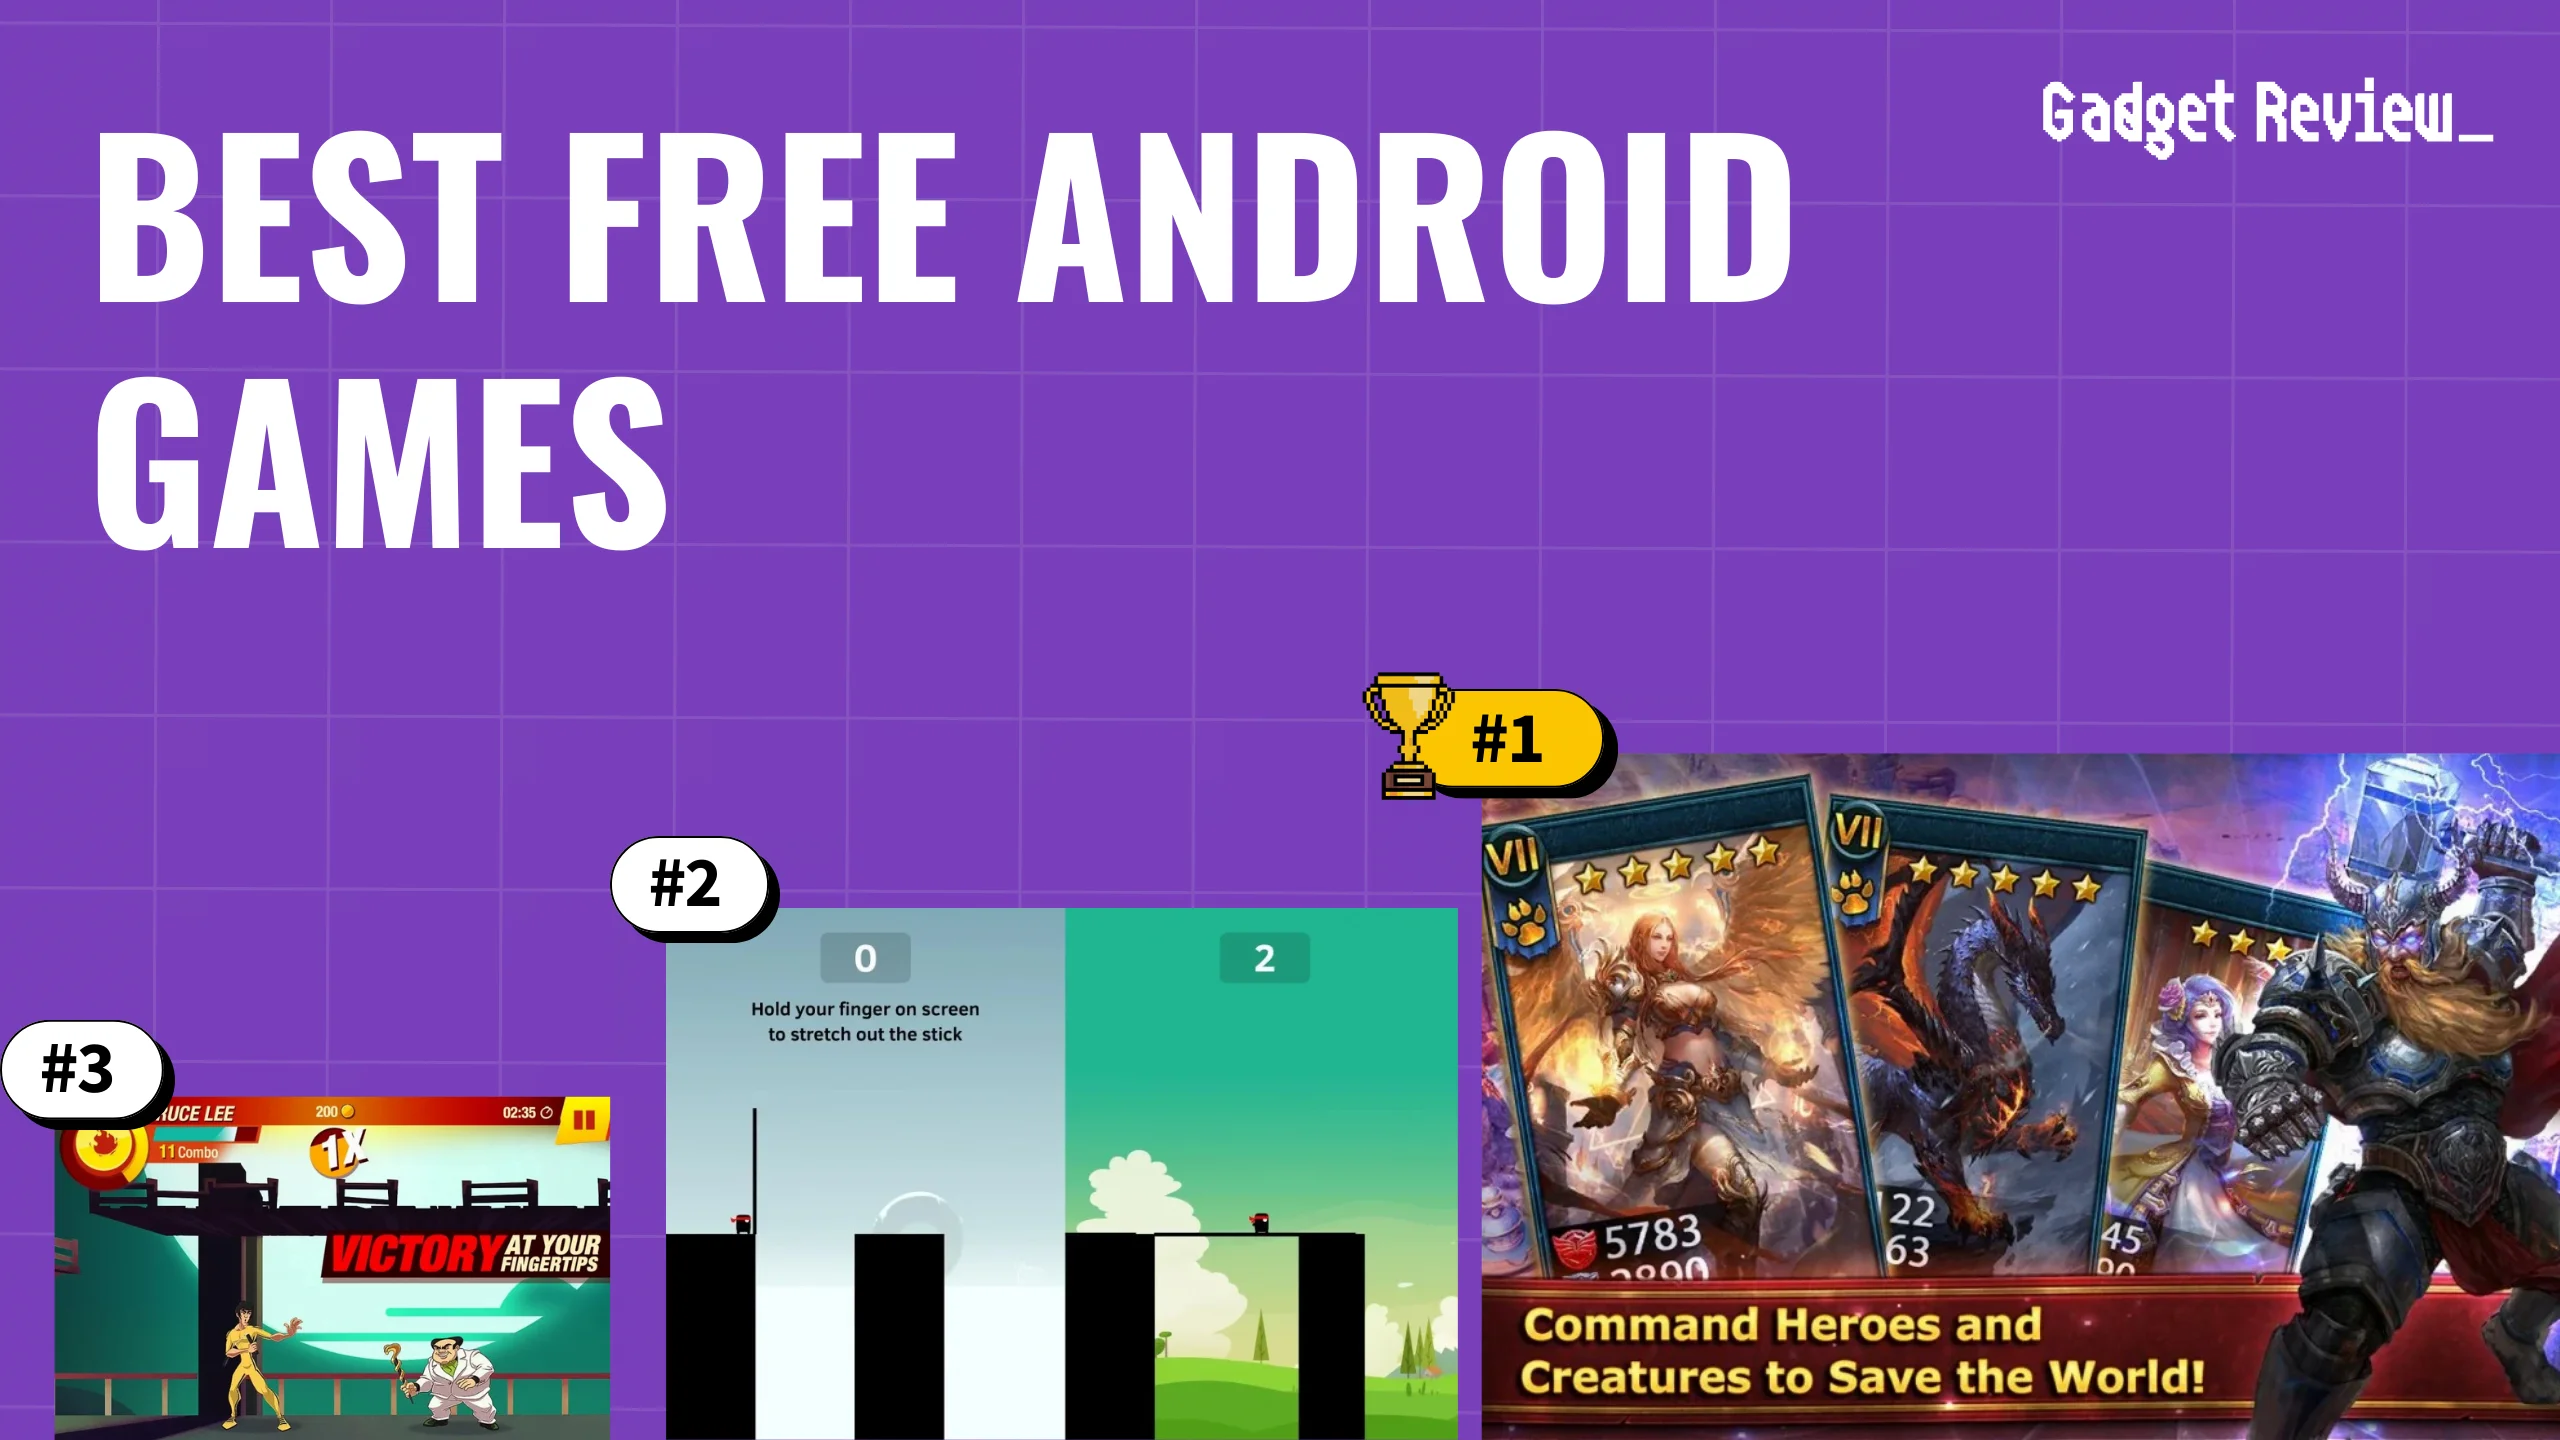 10 of the Best Free Android Games